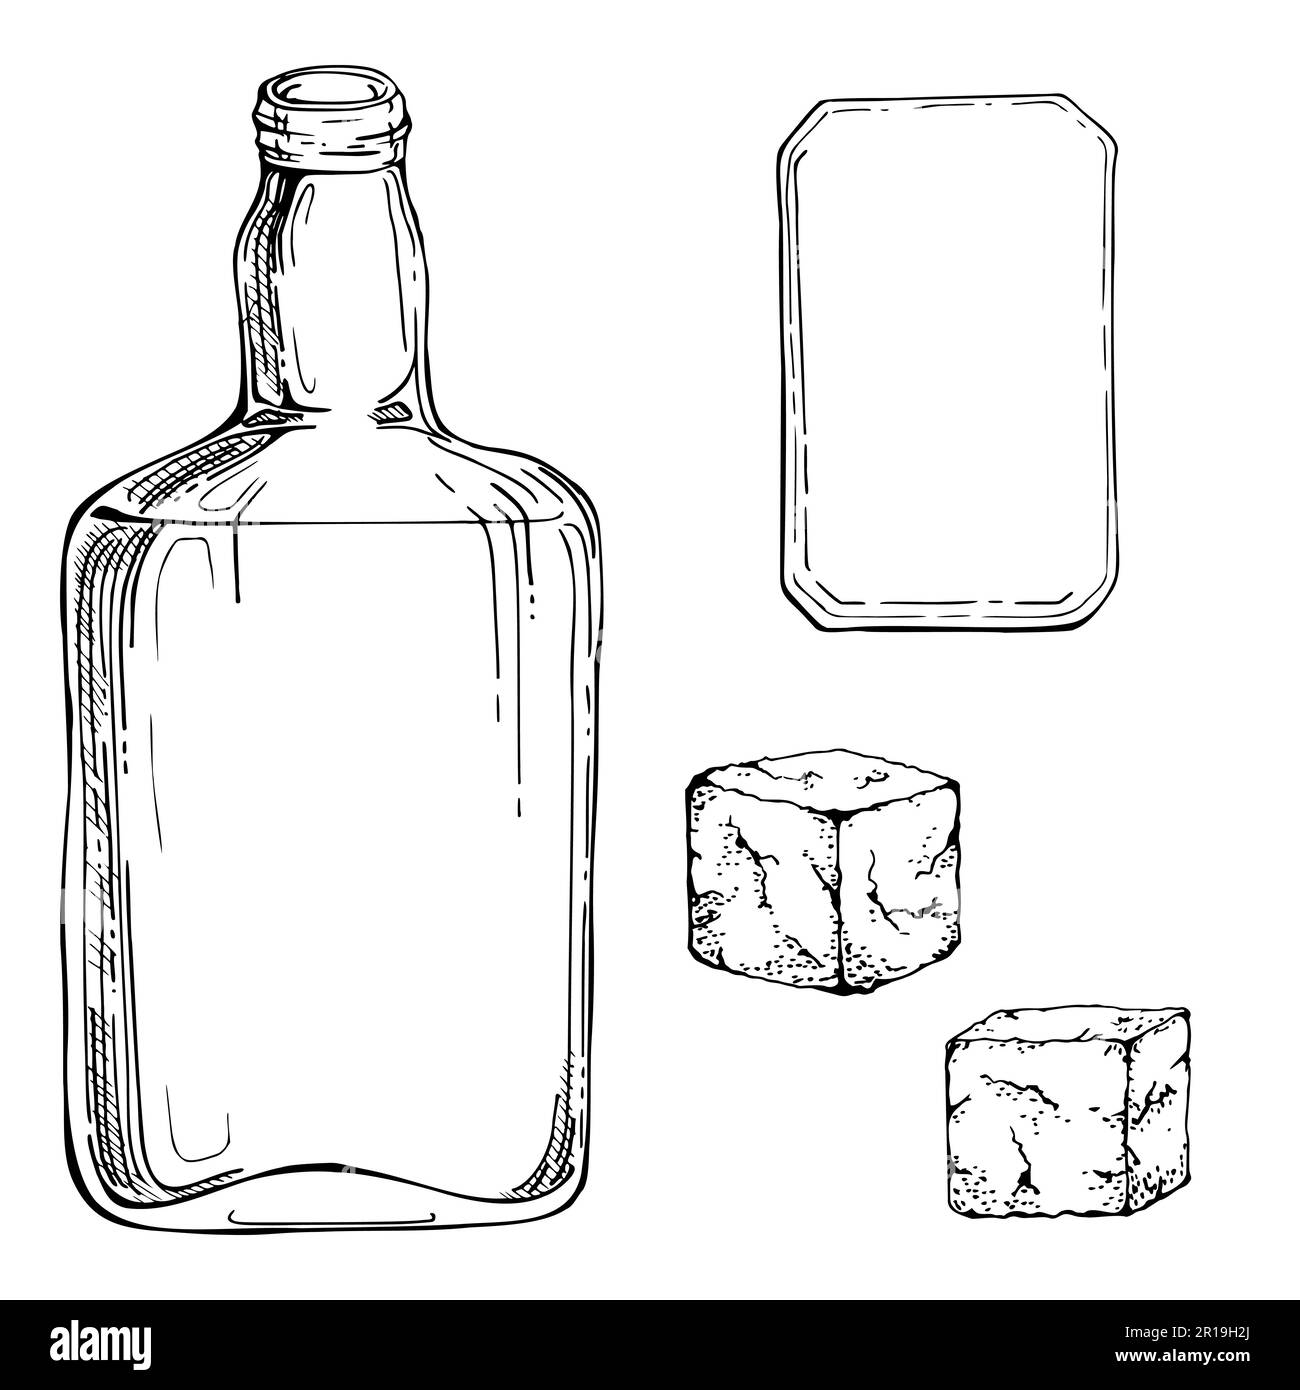 Ink hand drawn vector sketch of isolated object. Scotch whisky whiskey glass square bottle with label and rocks. Scottish symbol drink Design for Stock Vector